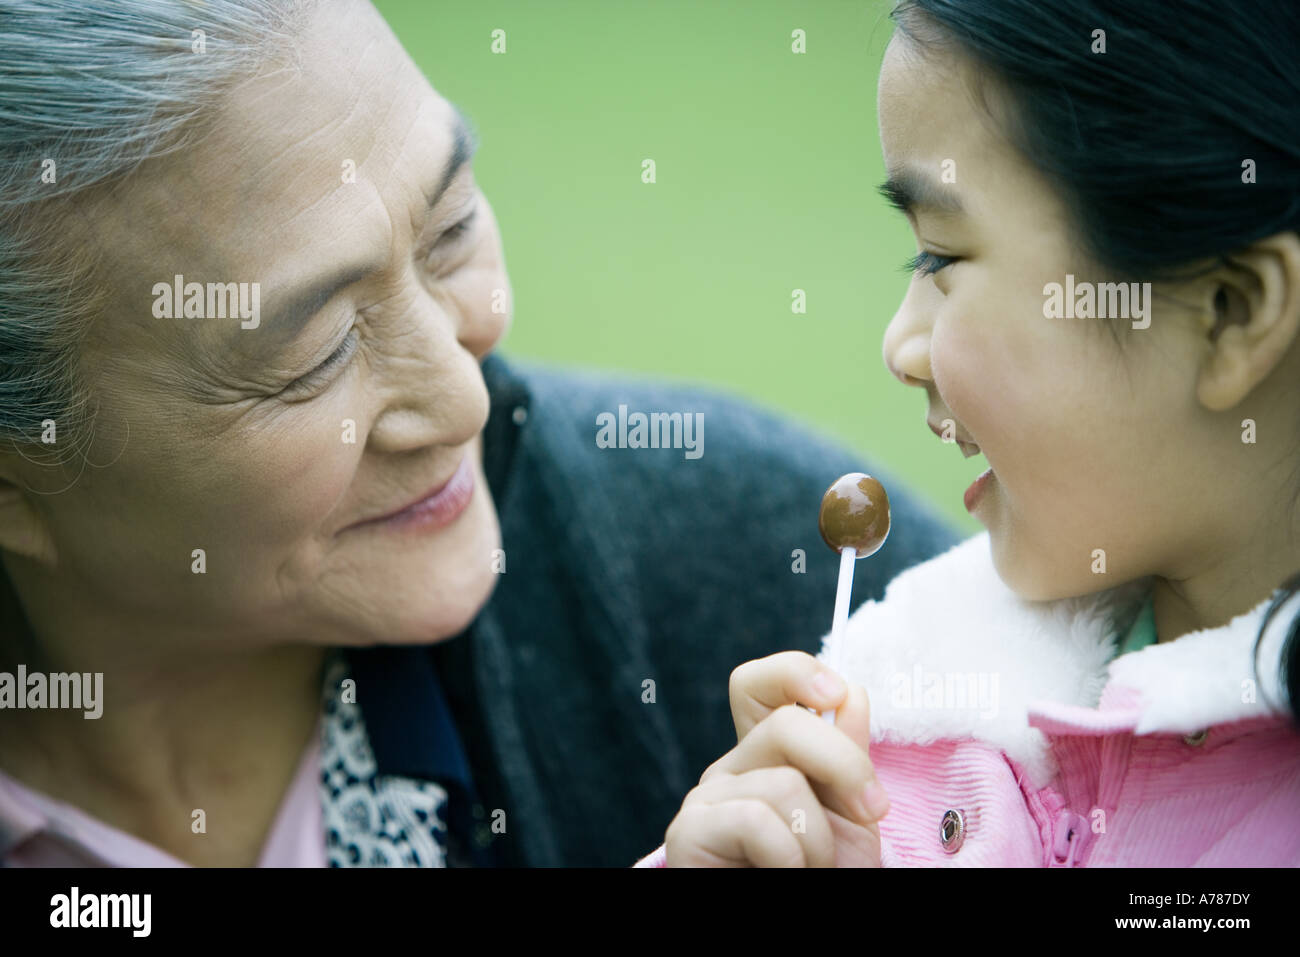 Girl eating lollipop, looking at grandmother, close-up Stock Photo